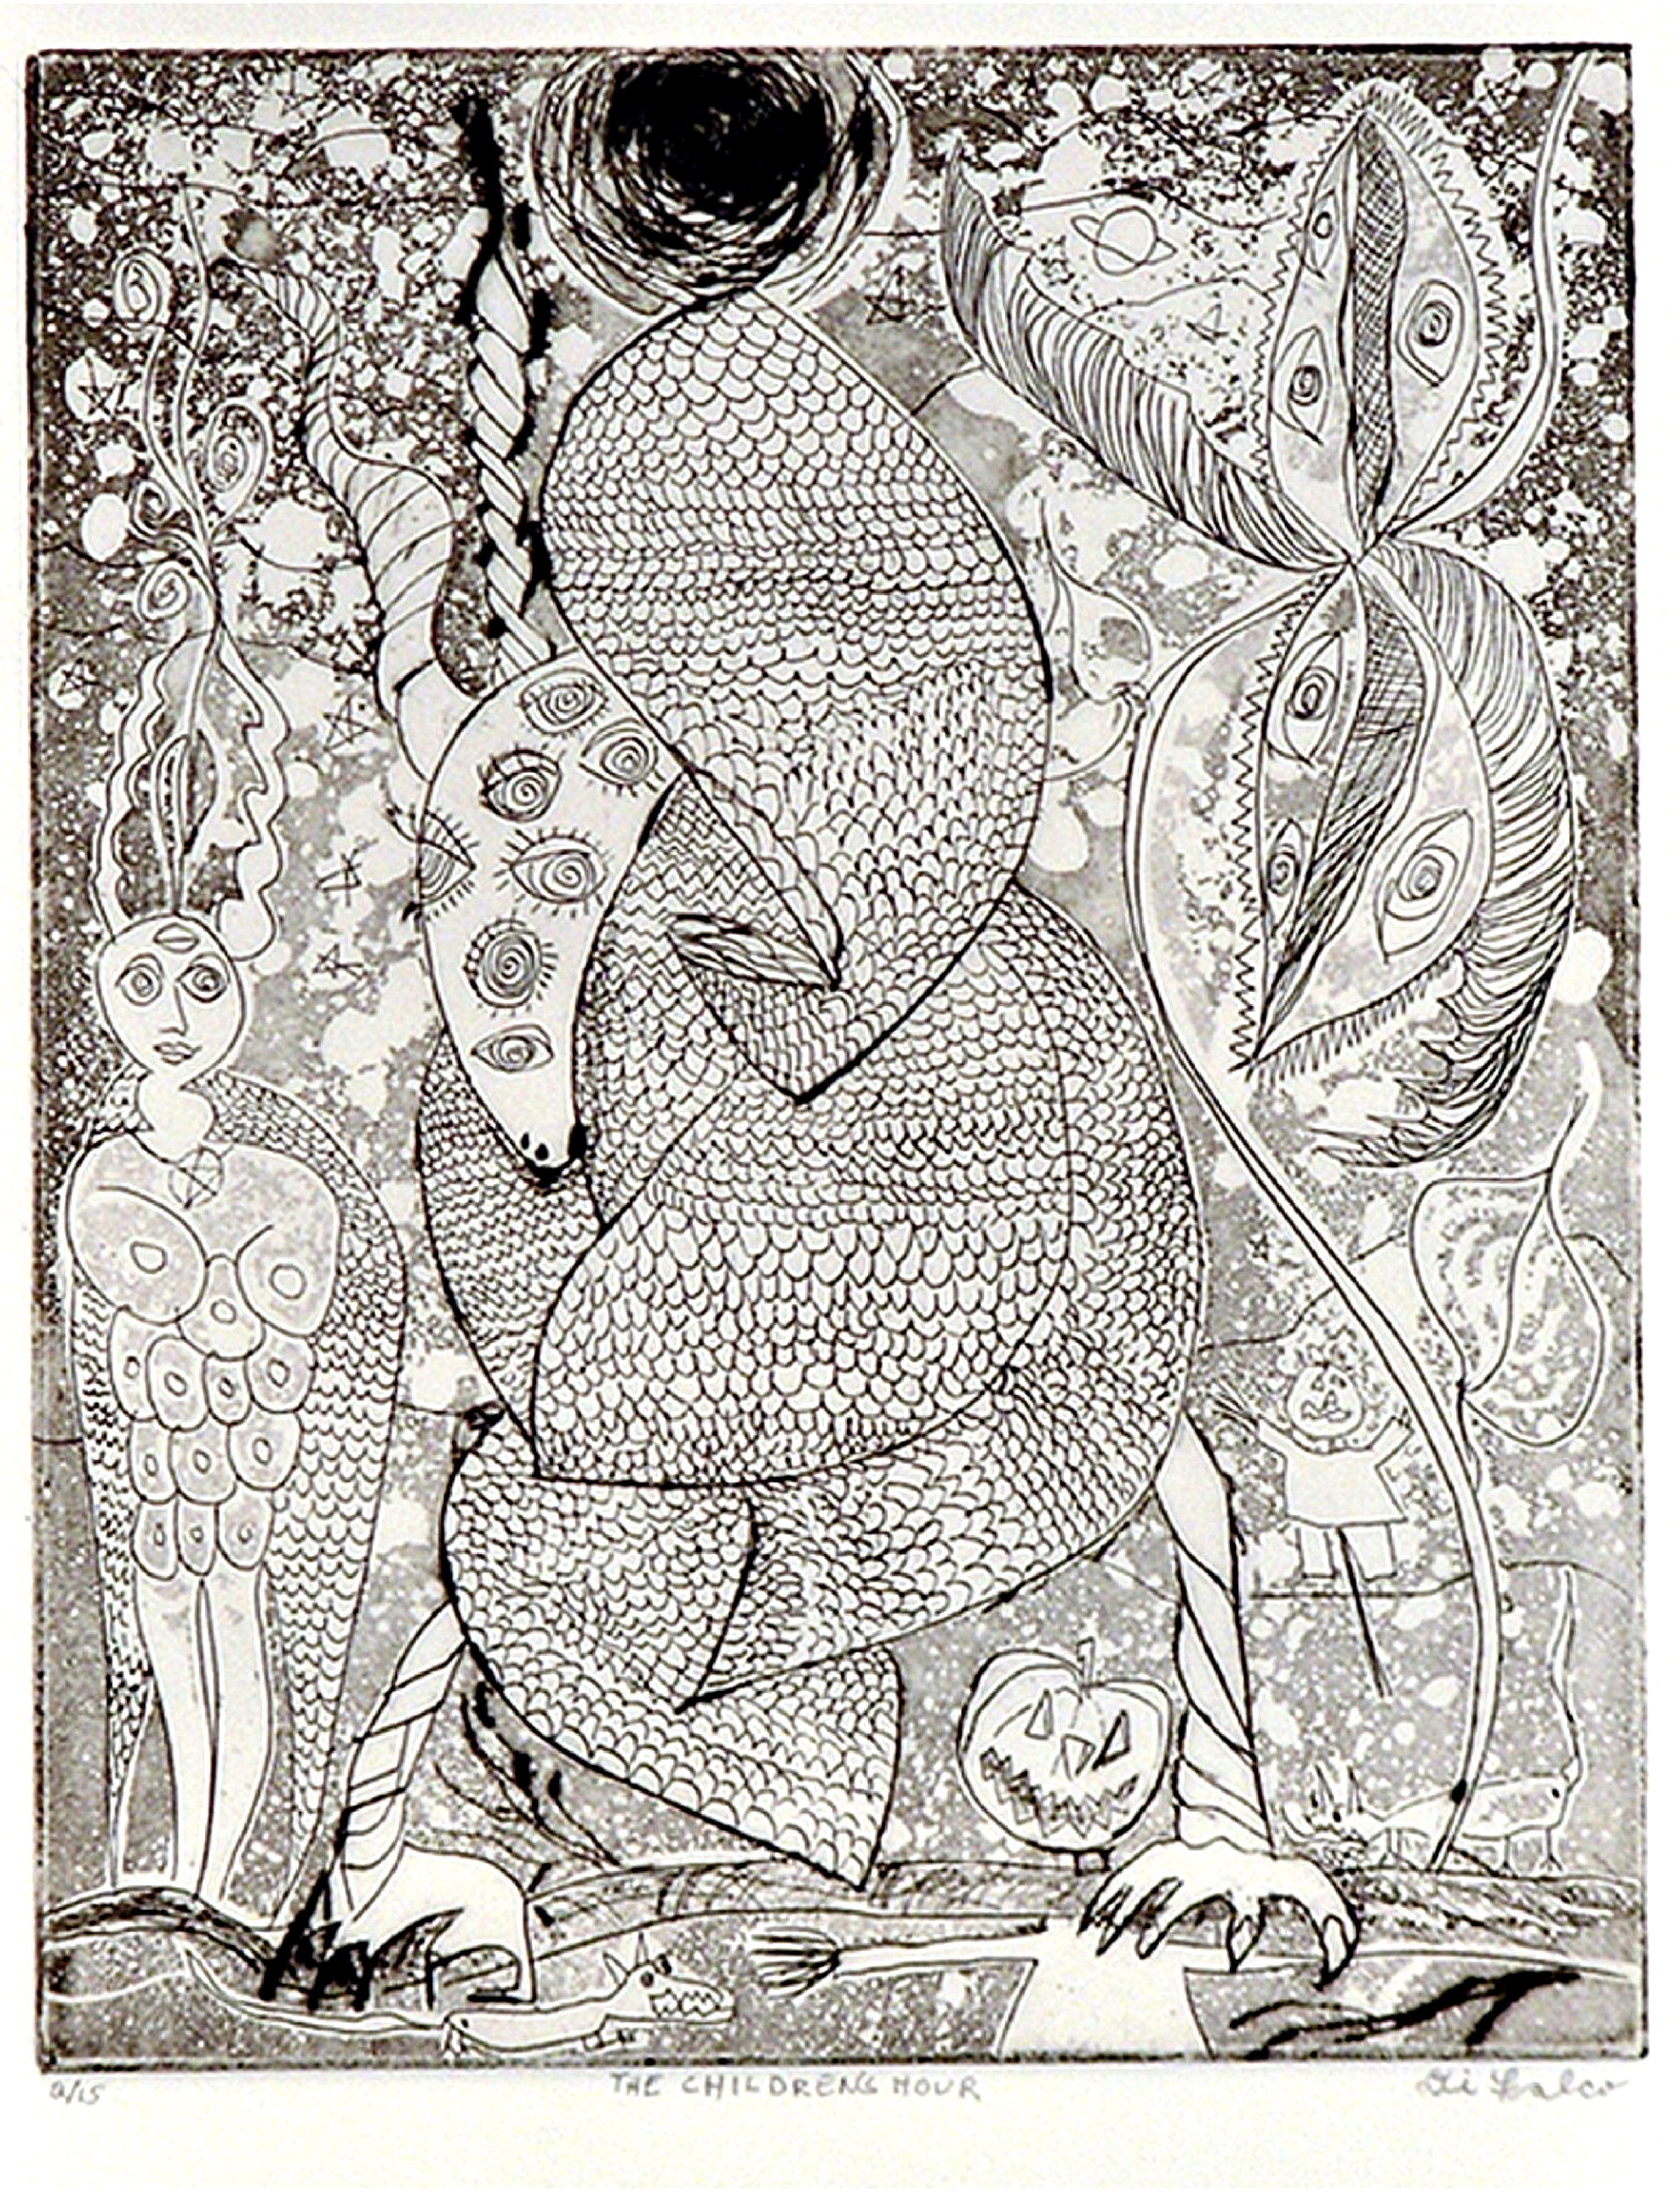 Jerry  Di Falco, 'The Childrens Hour', 2009, original Printmaking Etching, 17 x 21  inches. Artwork description: 15375 The imagery in this etching reflects my interests in ancient religions, folklore, mythology and the universality of dream symbolism. Image size is 10 inches high by 8 inches wide. Print is 15 inches by 12. 5 inches wide. I hand printed and published this edition at The ...